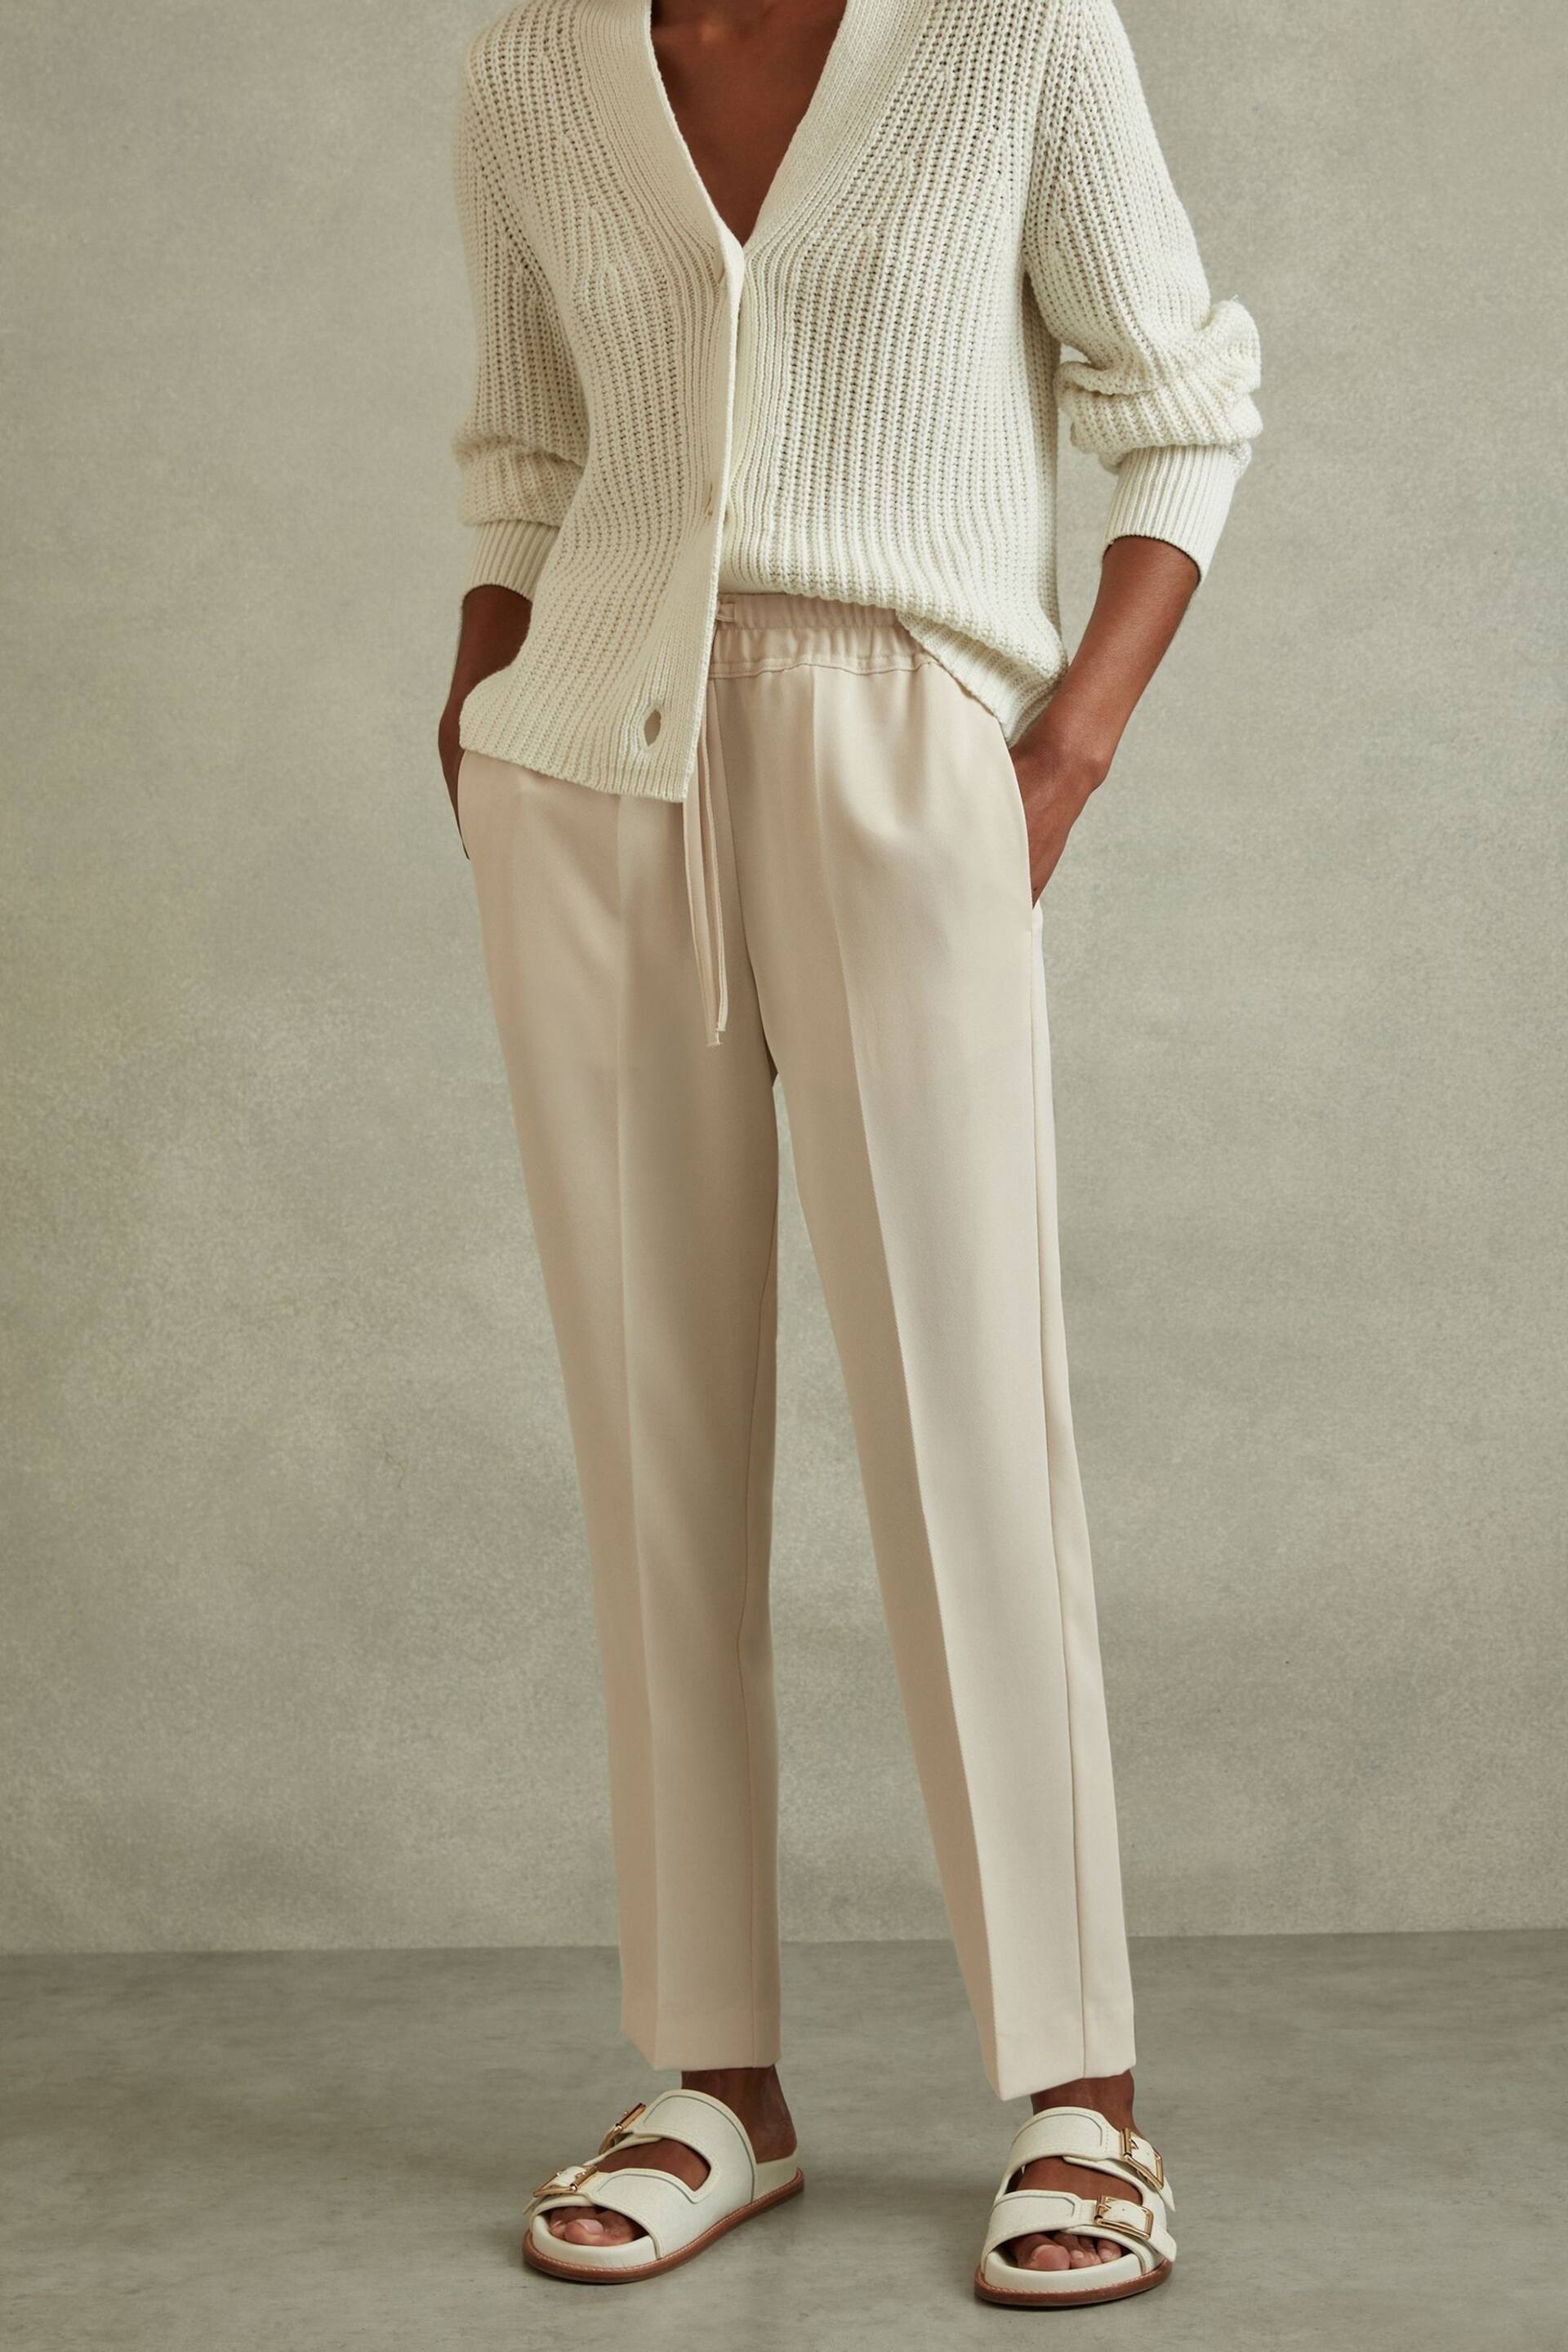 Reiss Cream Hailey Petite Tapered Pull On Trousers - Image 3 of 6